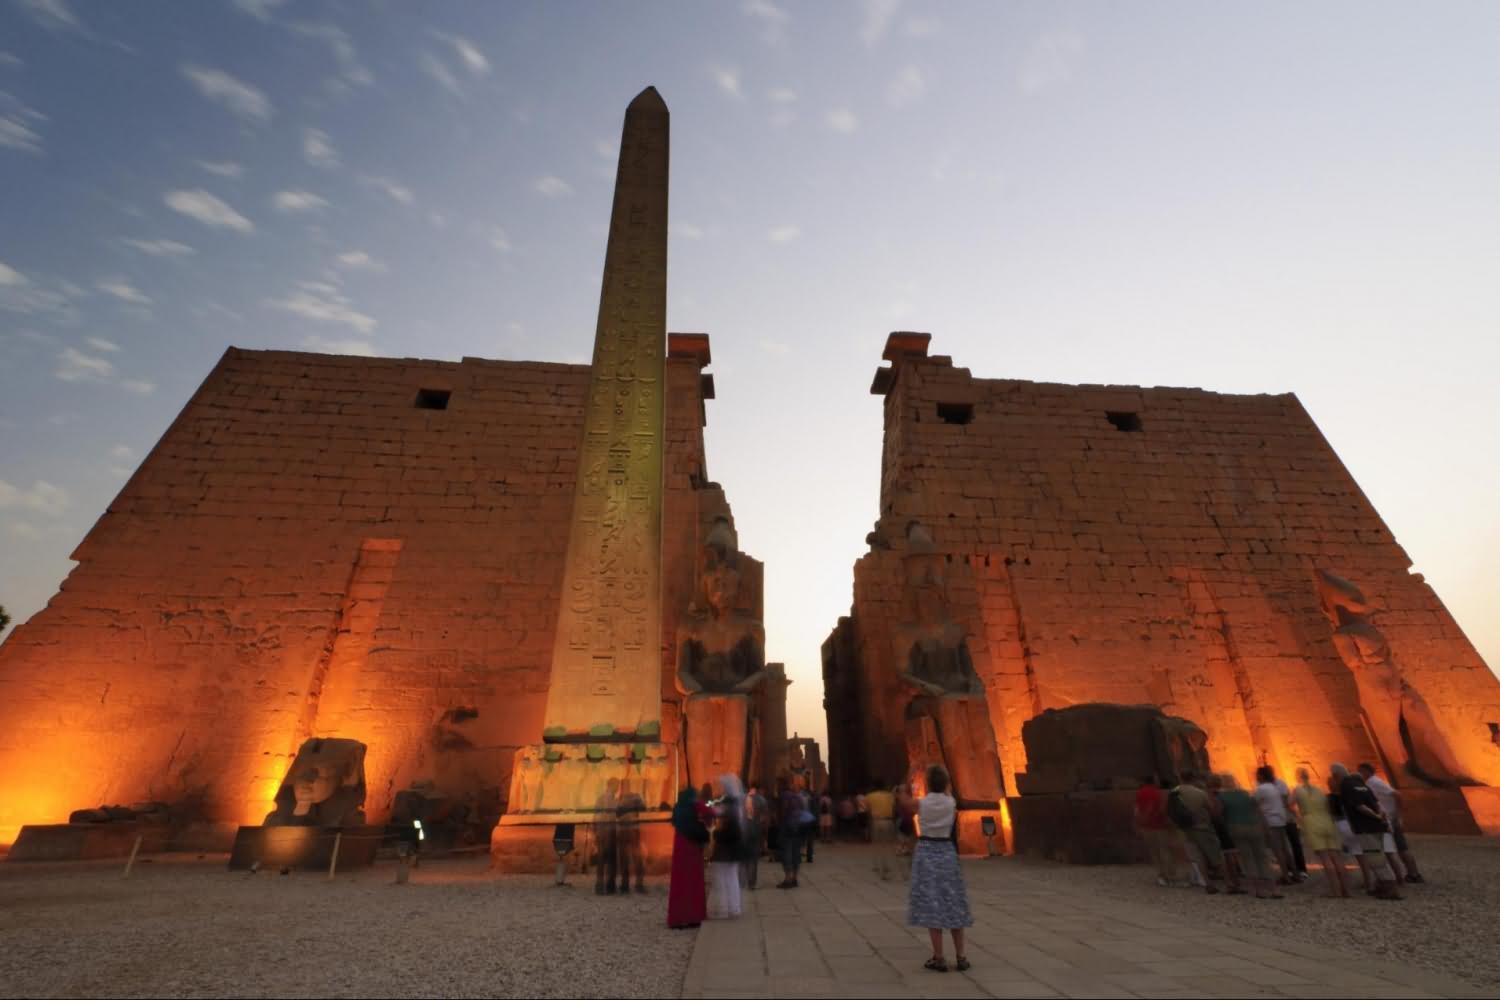 Main Entrance Of The Luxor Temple At Night